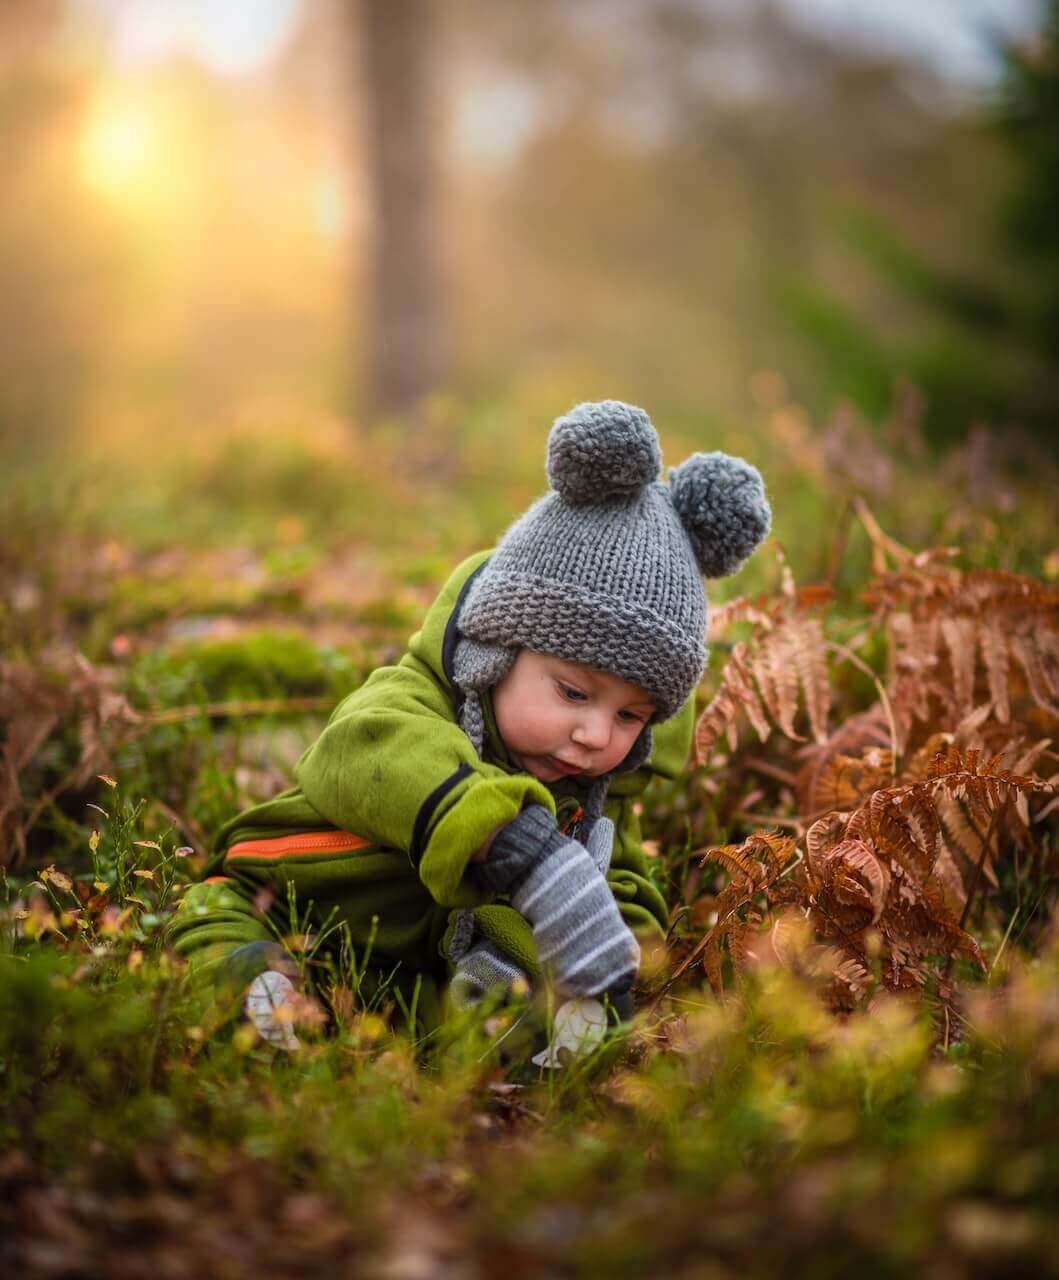 Cute baby exploring the winter woodland